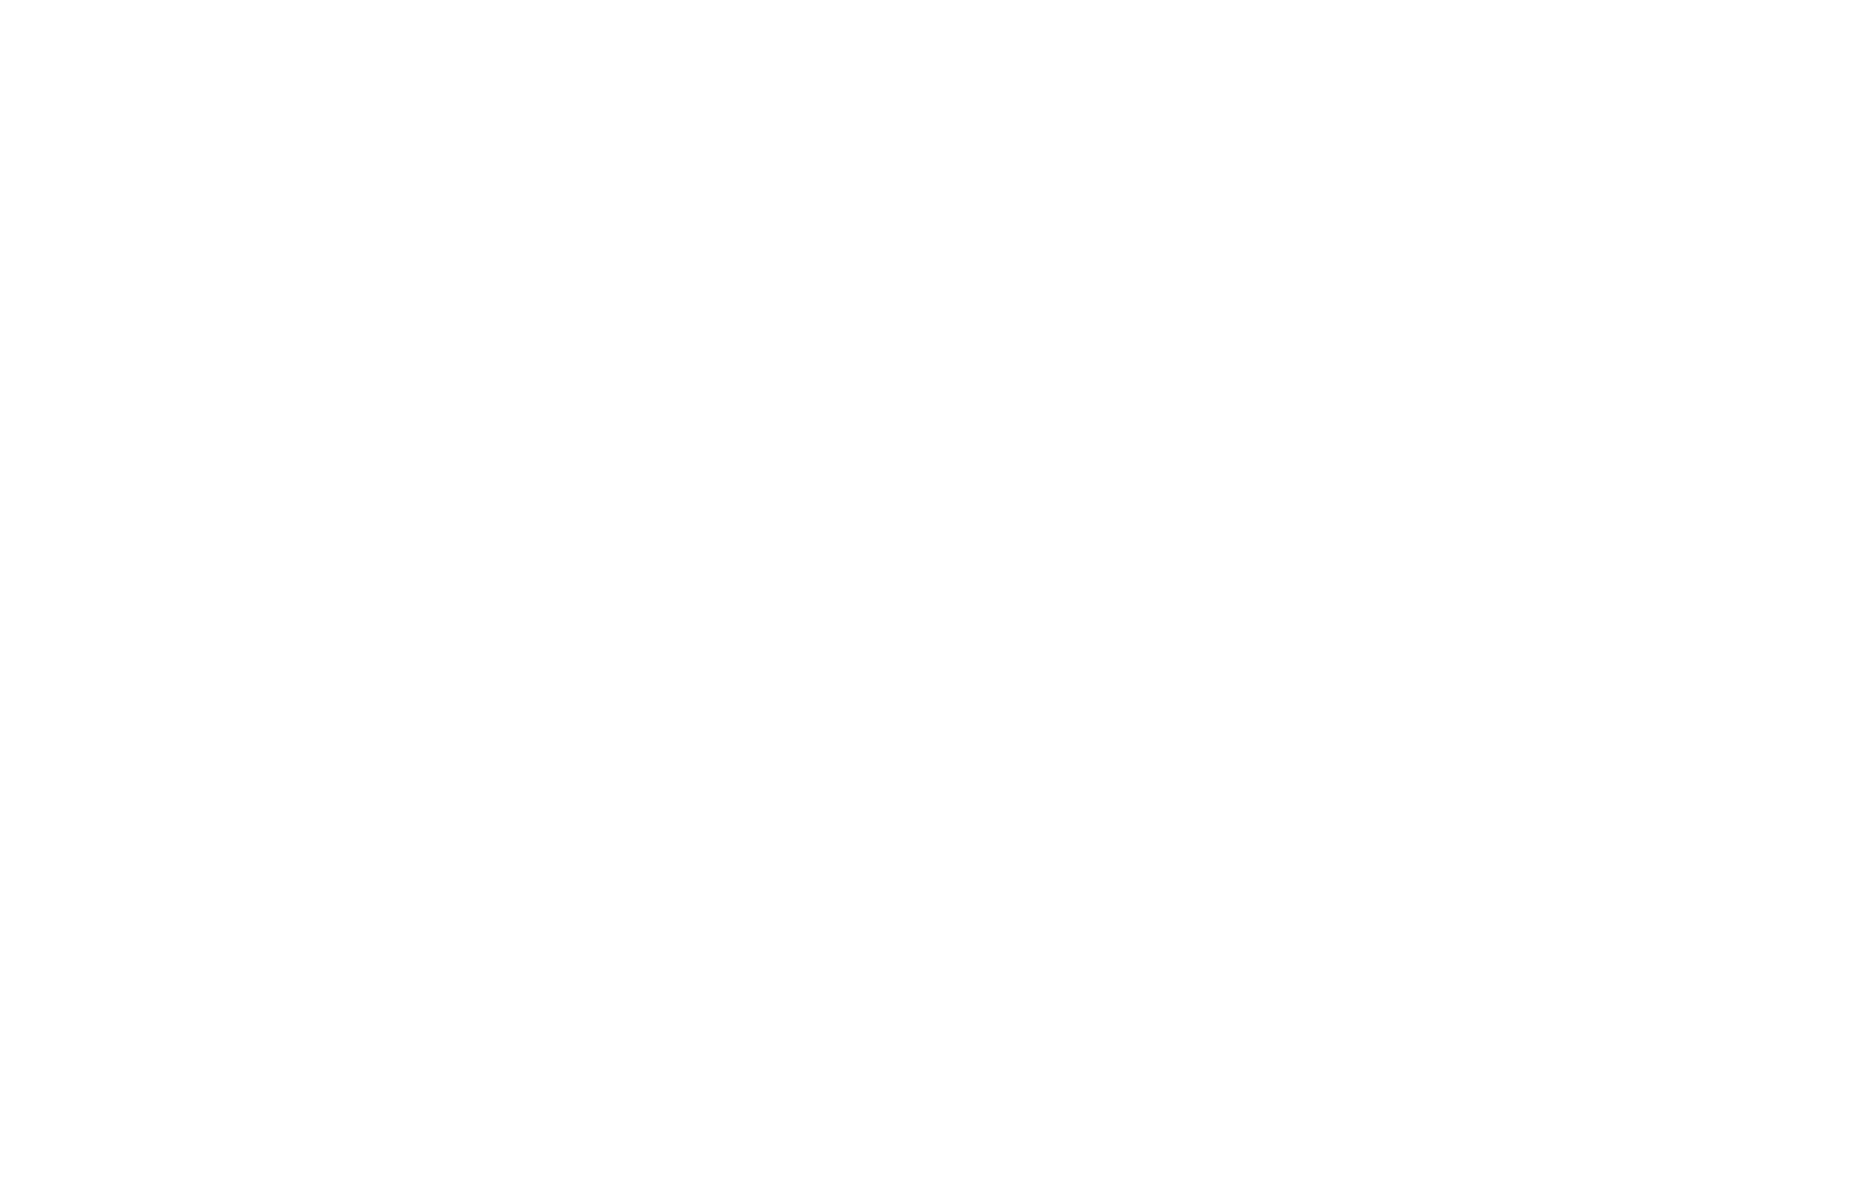 PIF Lending White logo with a white house outline and lighter blue background